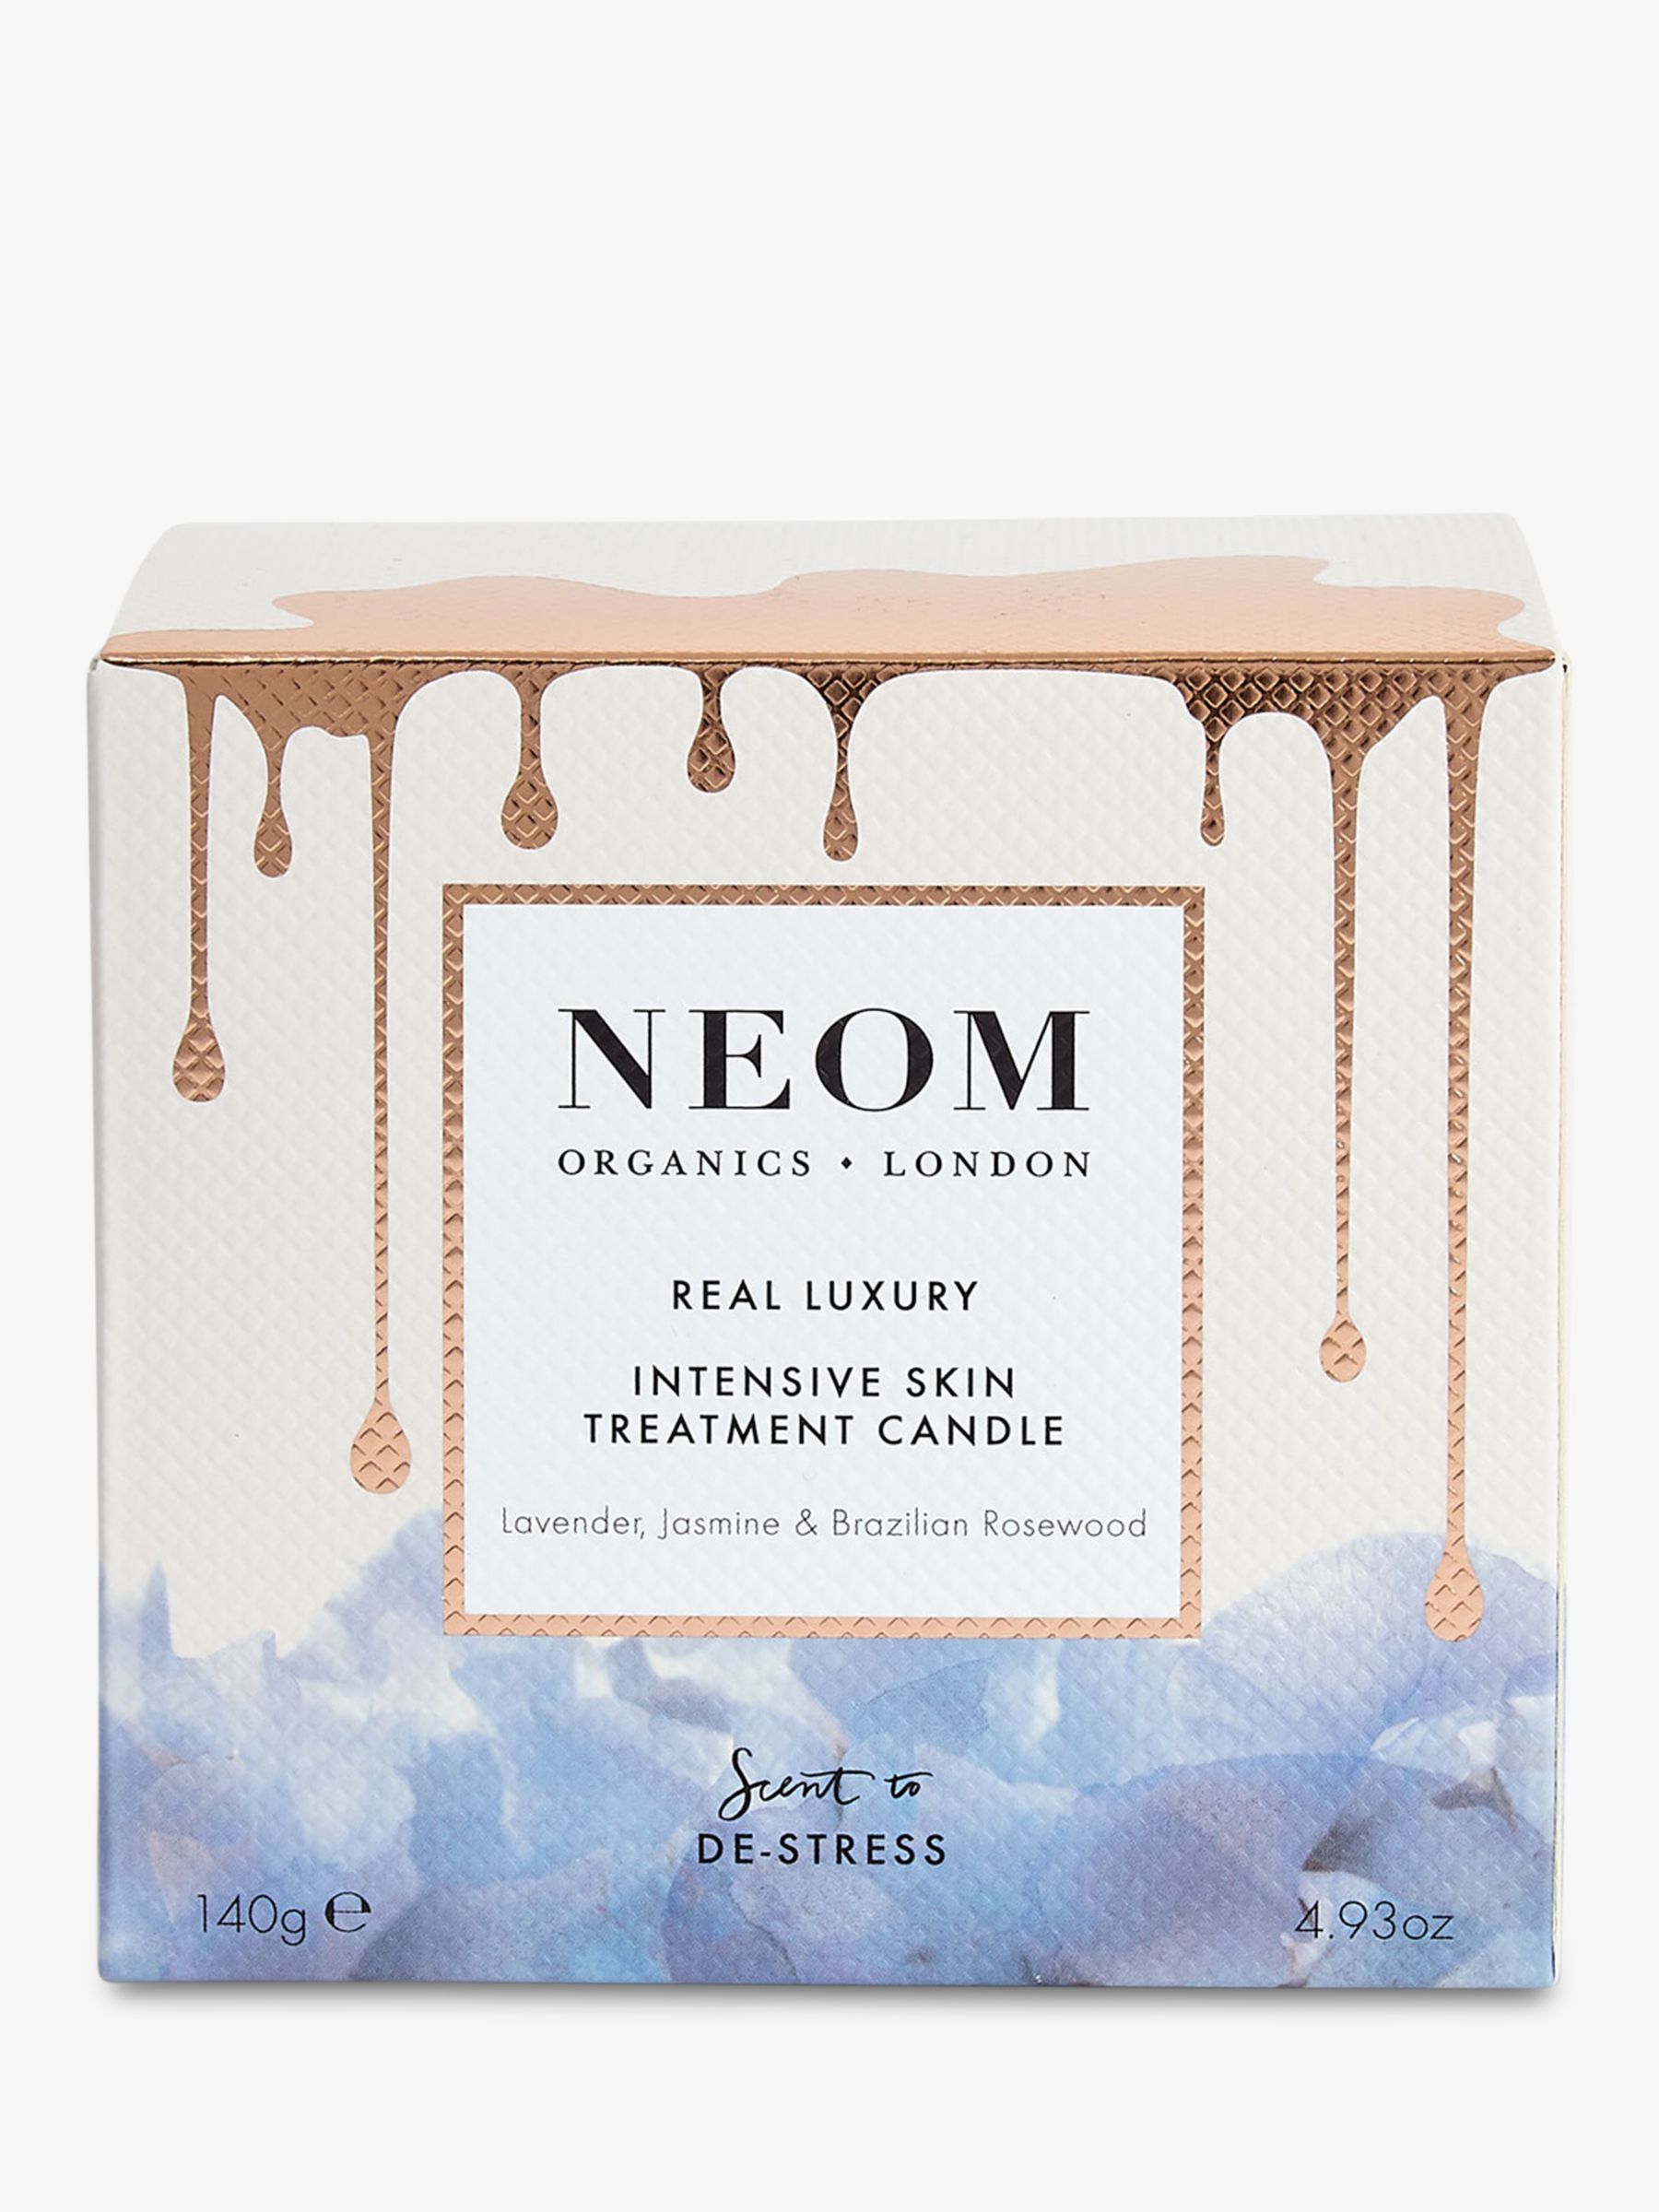 Neom Organics London Real Luxury Skin Treatment Scented Candle, 140g 2